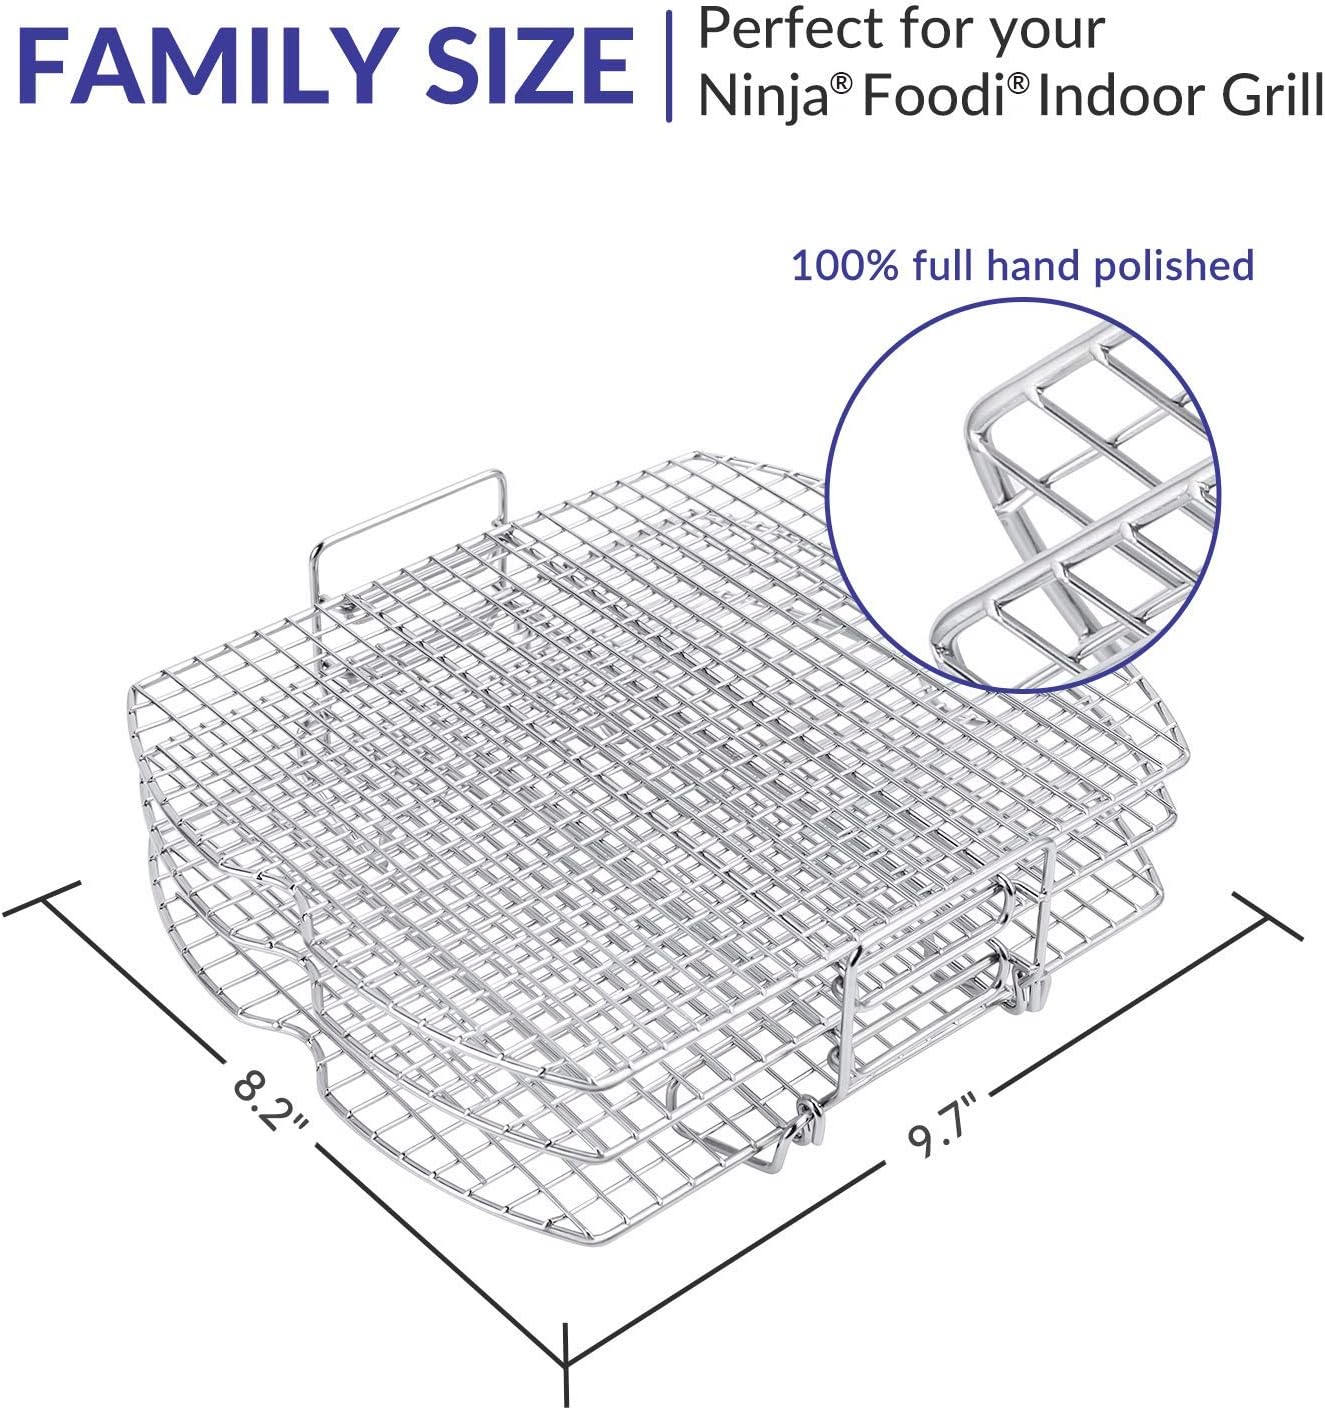 Grill Griddle Grate Pan fits for Ninja Foodi AG301, AG300, AG400, AG30 –  GrillPartsReplacement - Online BBQ Parts Retailer